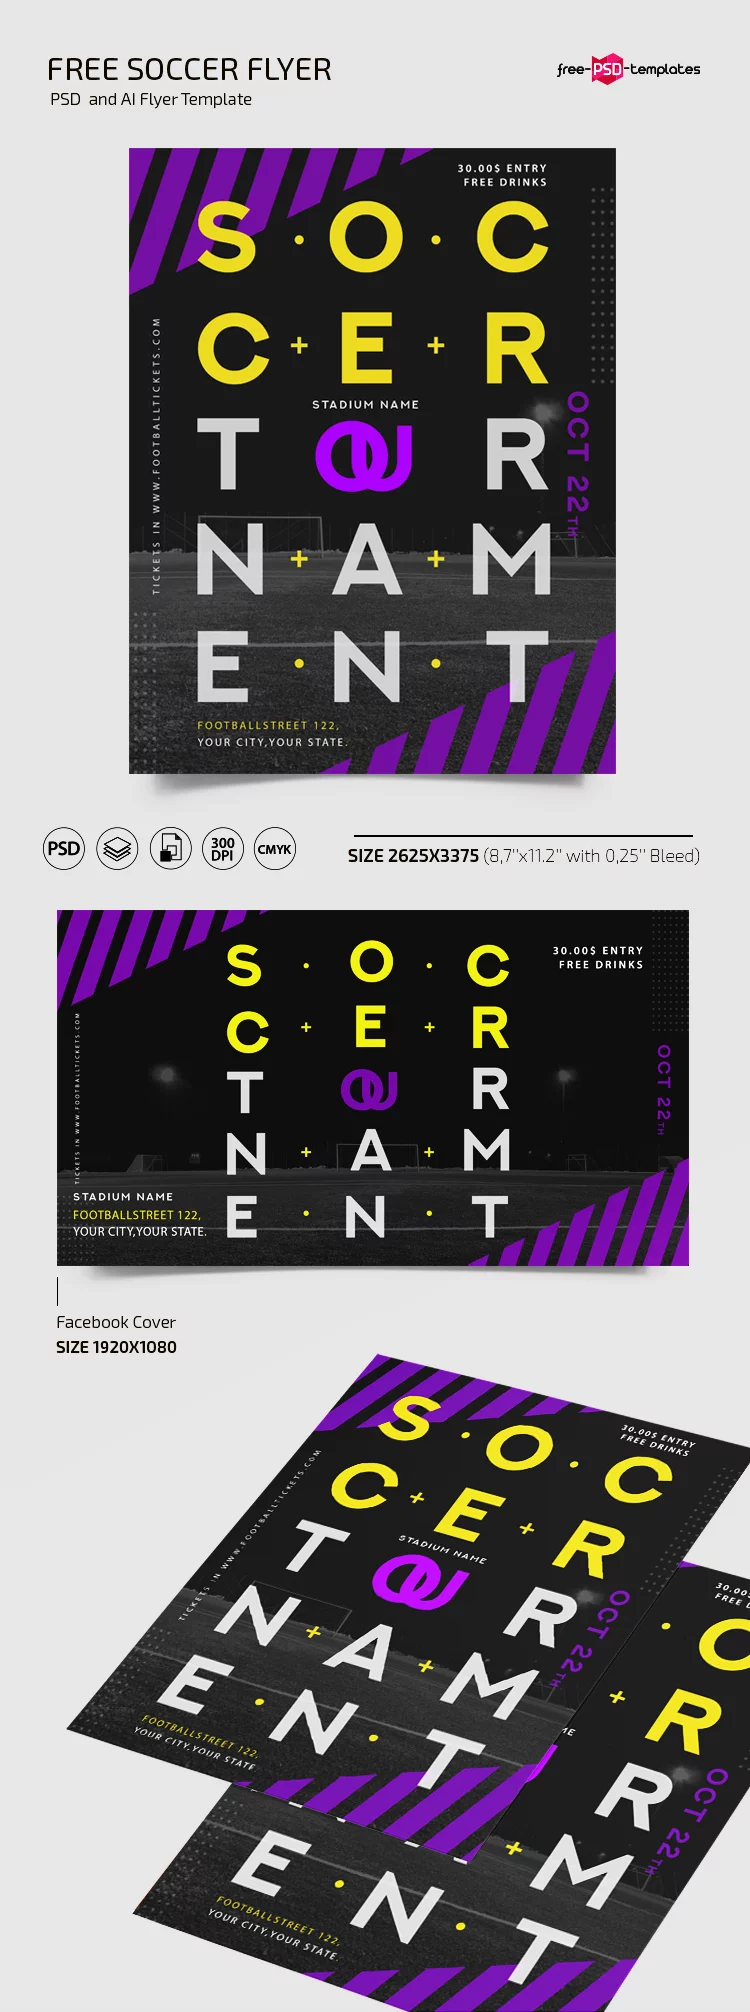 Free Soccer Flyer Template in PSD + AI